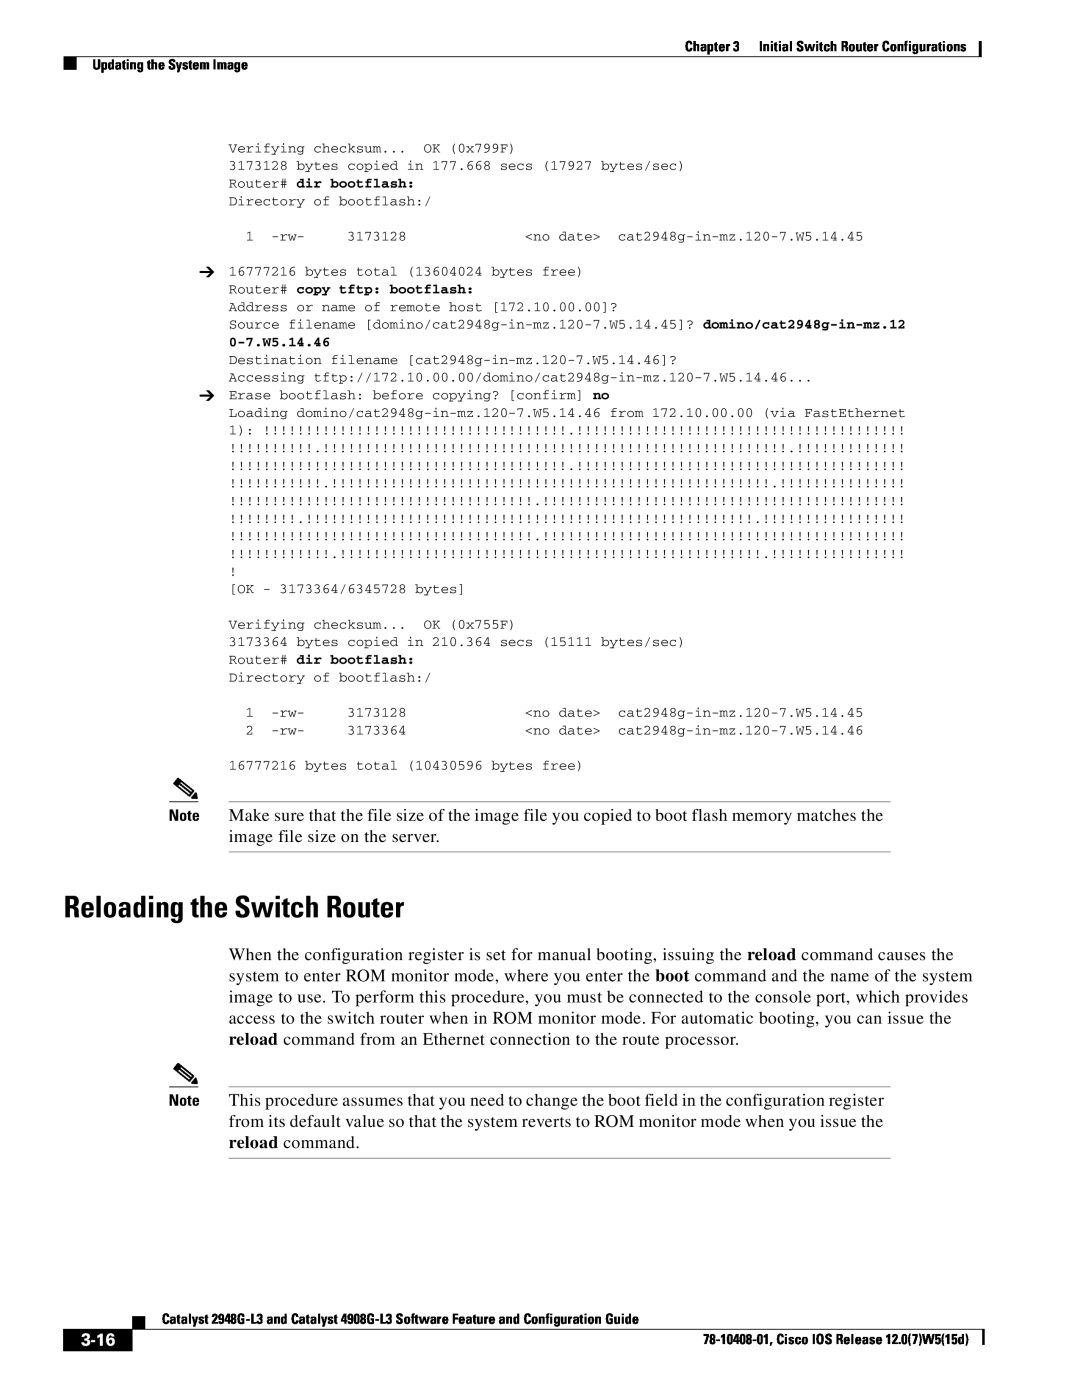 Cisco Systems manual Reloading the Switch Router, 3-16 